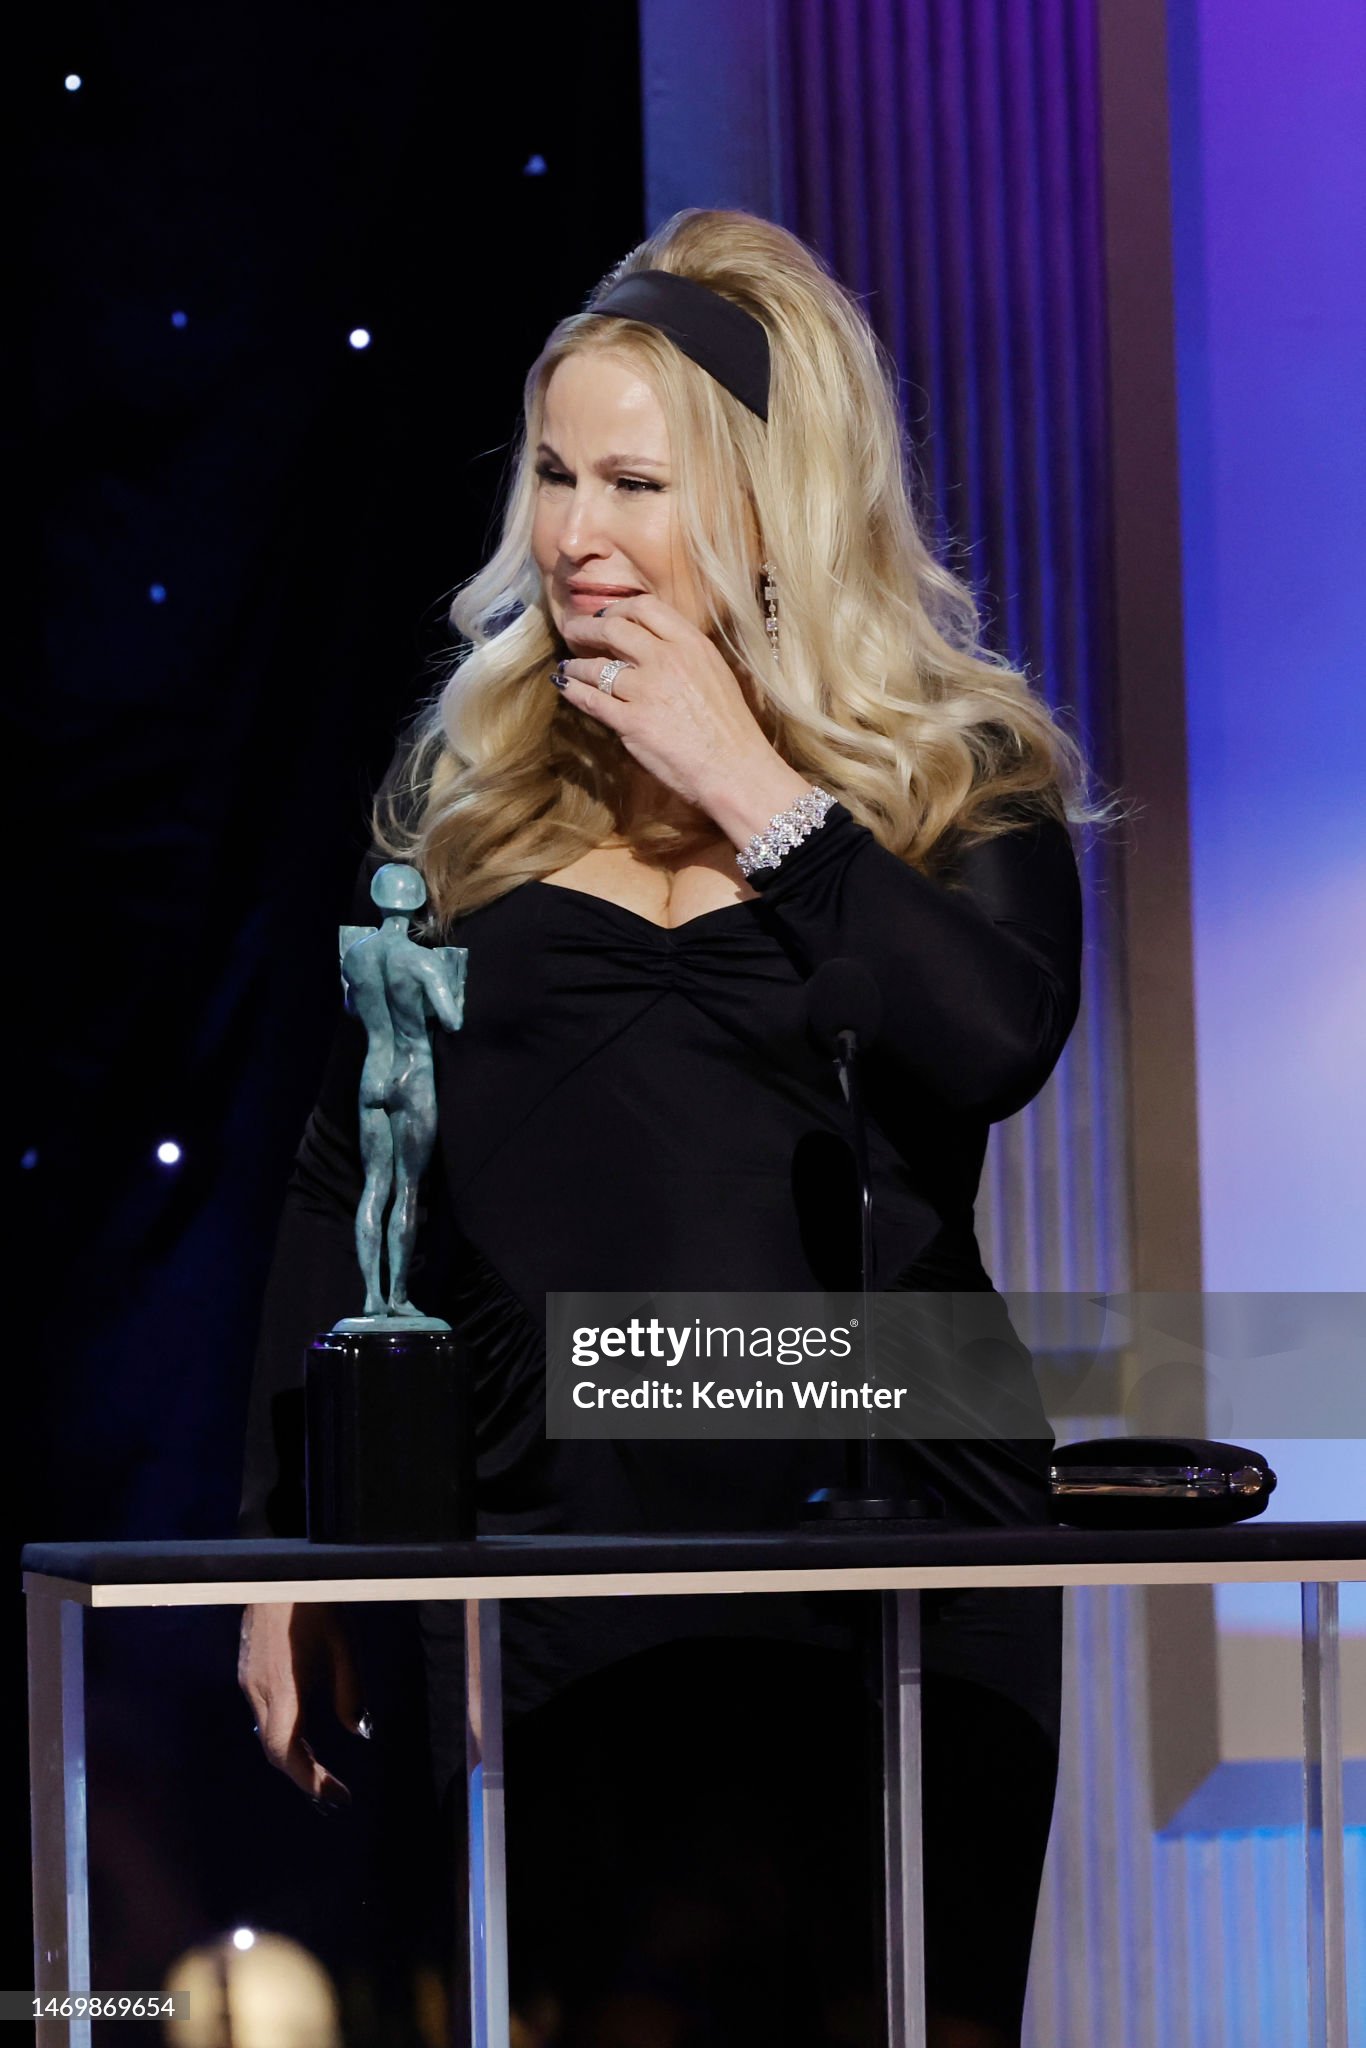 jennifer-coolidge-accepts-the-outstanding-performance-by-a-female-actor-in-a-drama-series.jpg